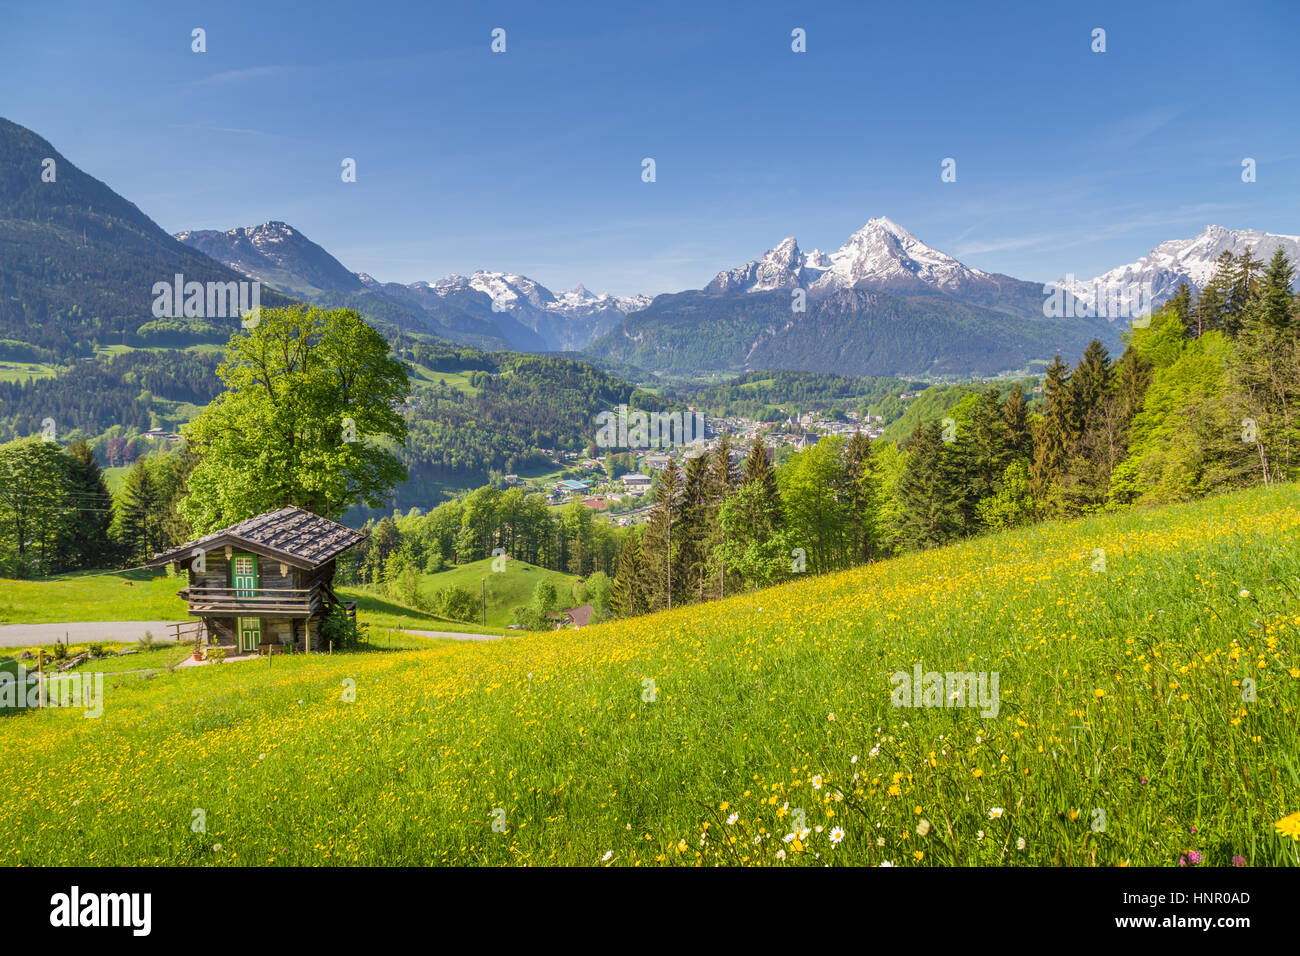 Panoramic view of idyllic mountain scenery in the Alps with traditional old mountain chalet and fresh green mountain pastures with blooming flowers Stock Photo